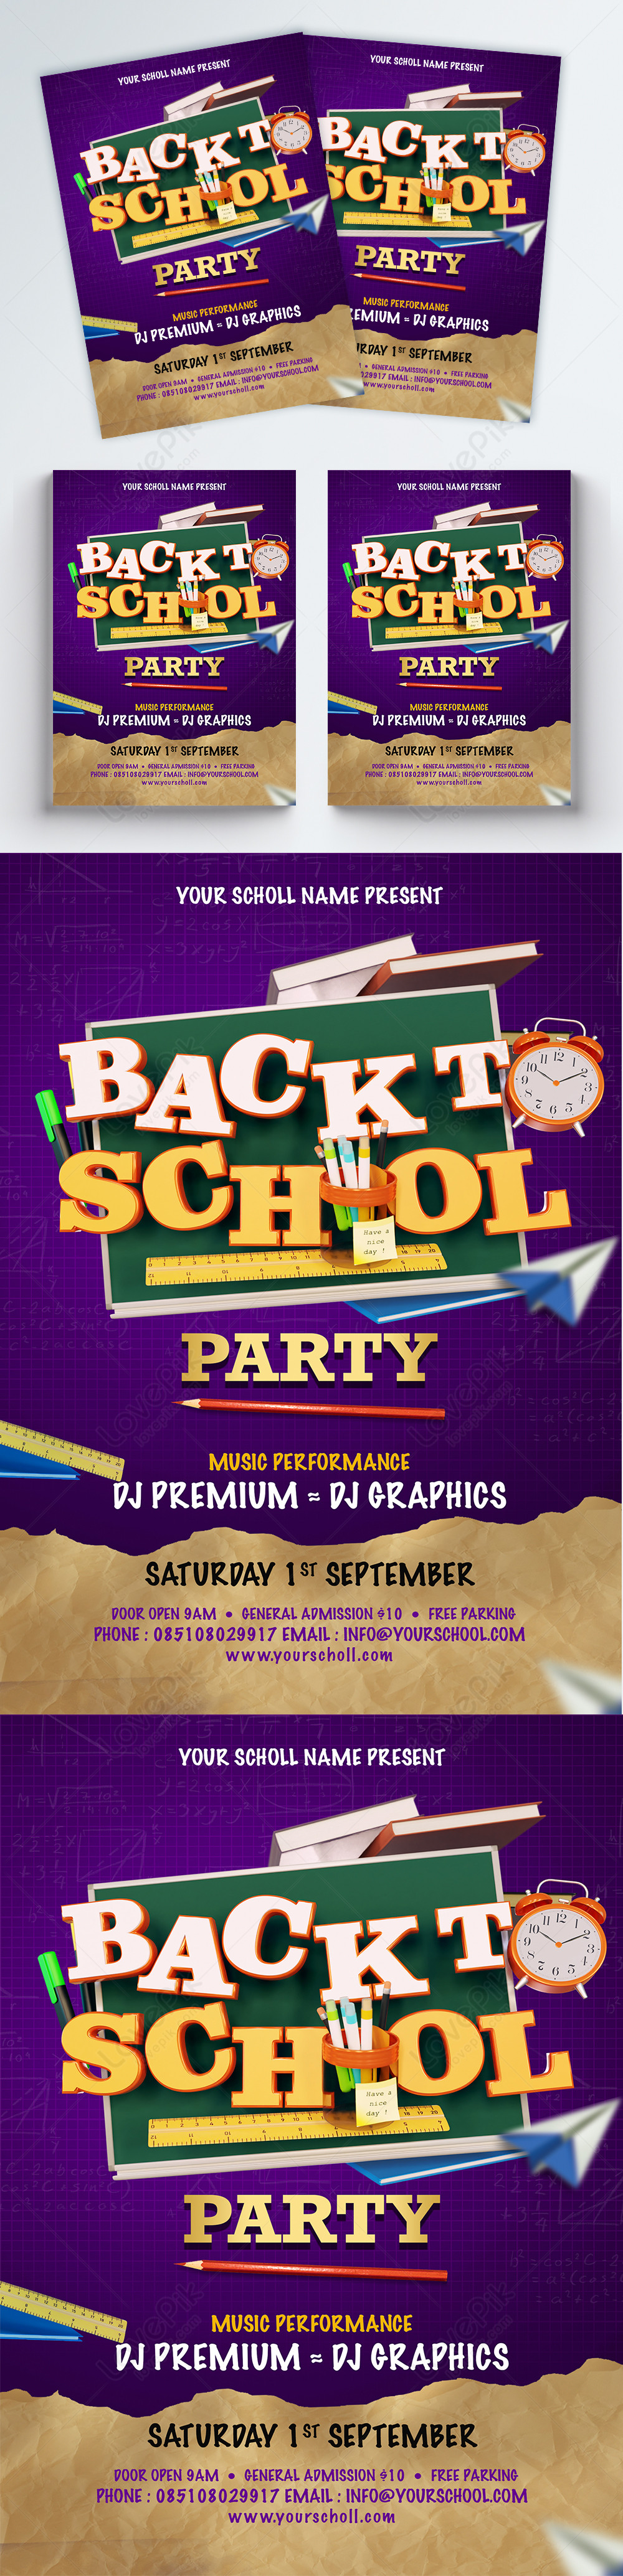 back-to-school-flyer-design-template-image-picture-free-download